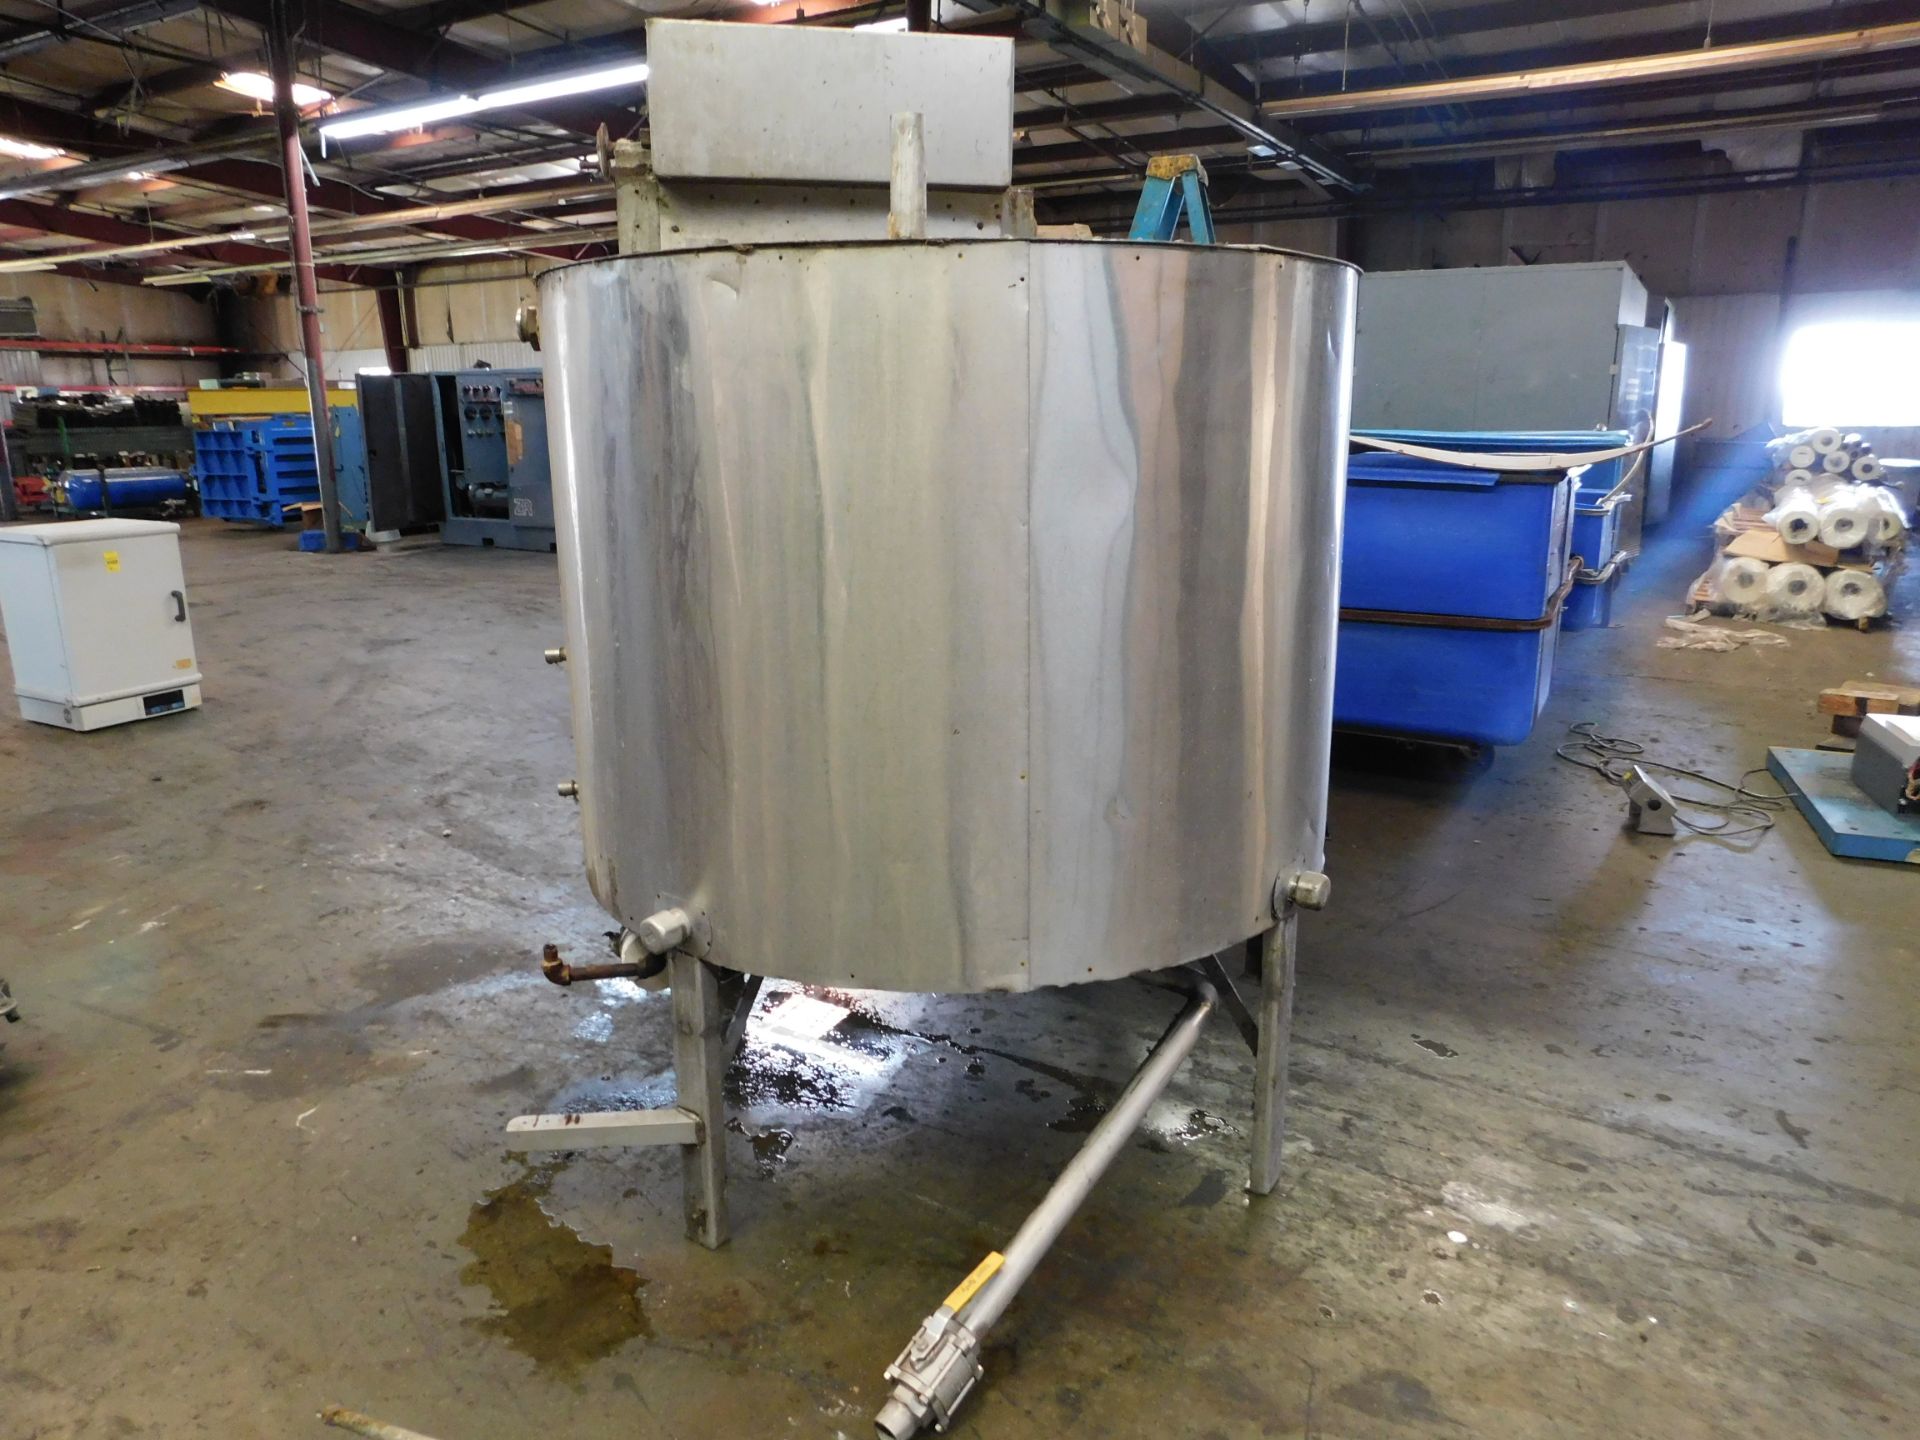 Stainless Steel Tank, 66.25 inches Diameter, 48.25 inches Height, Agitator/Mixer, Discharge Bottom - Image 2 of 3